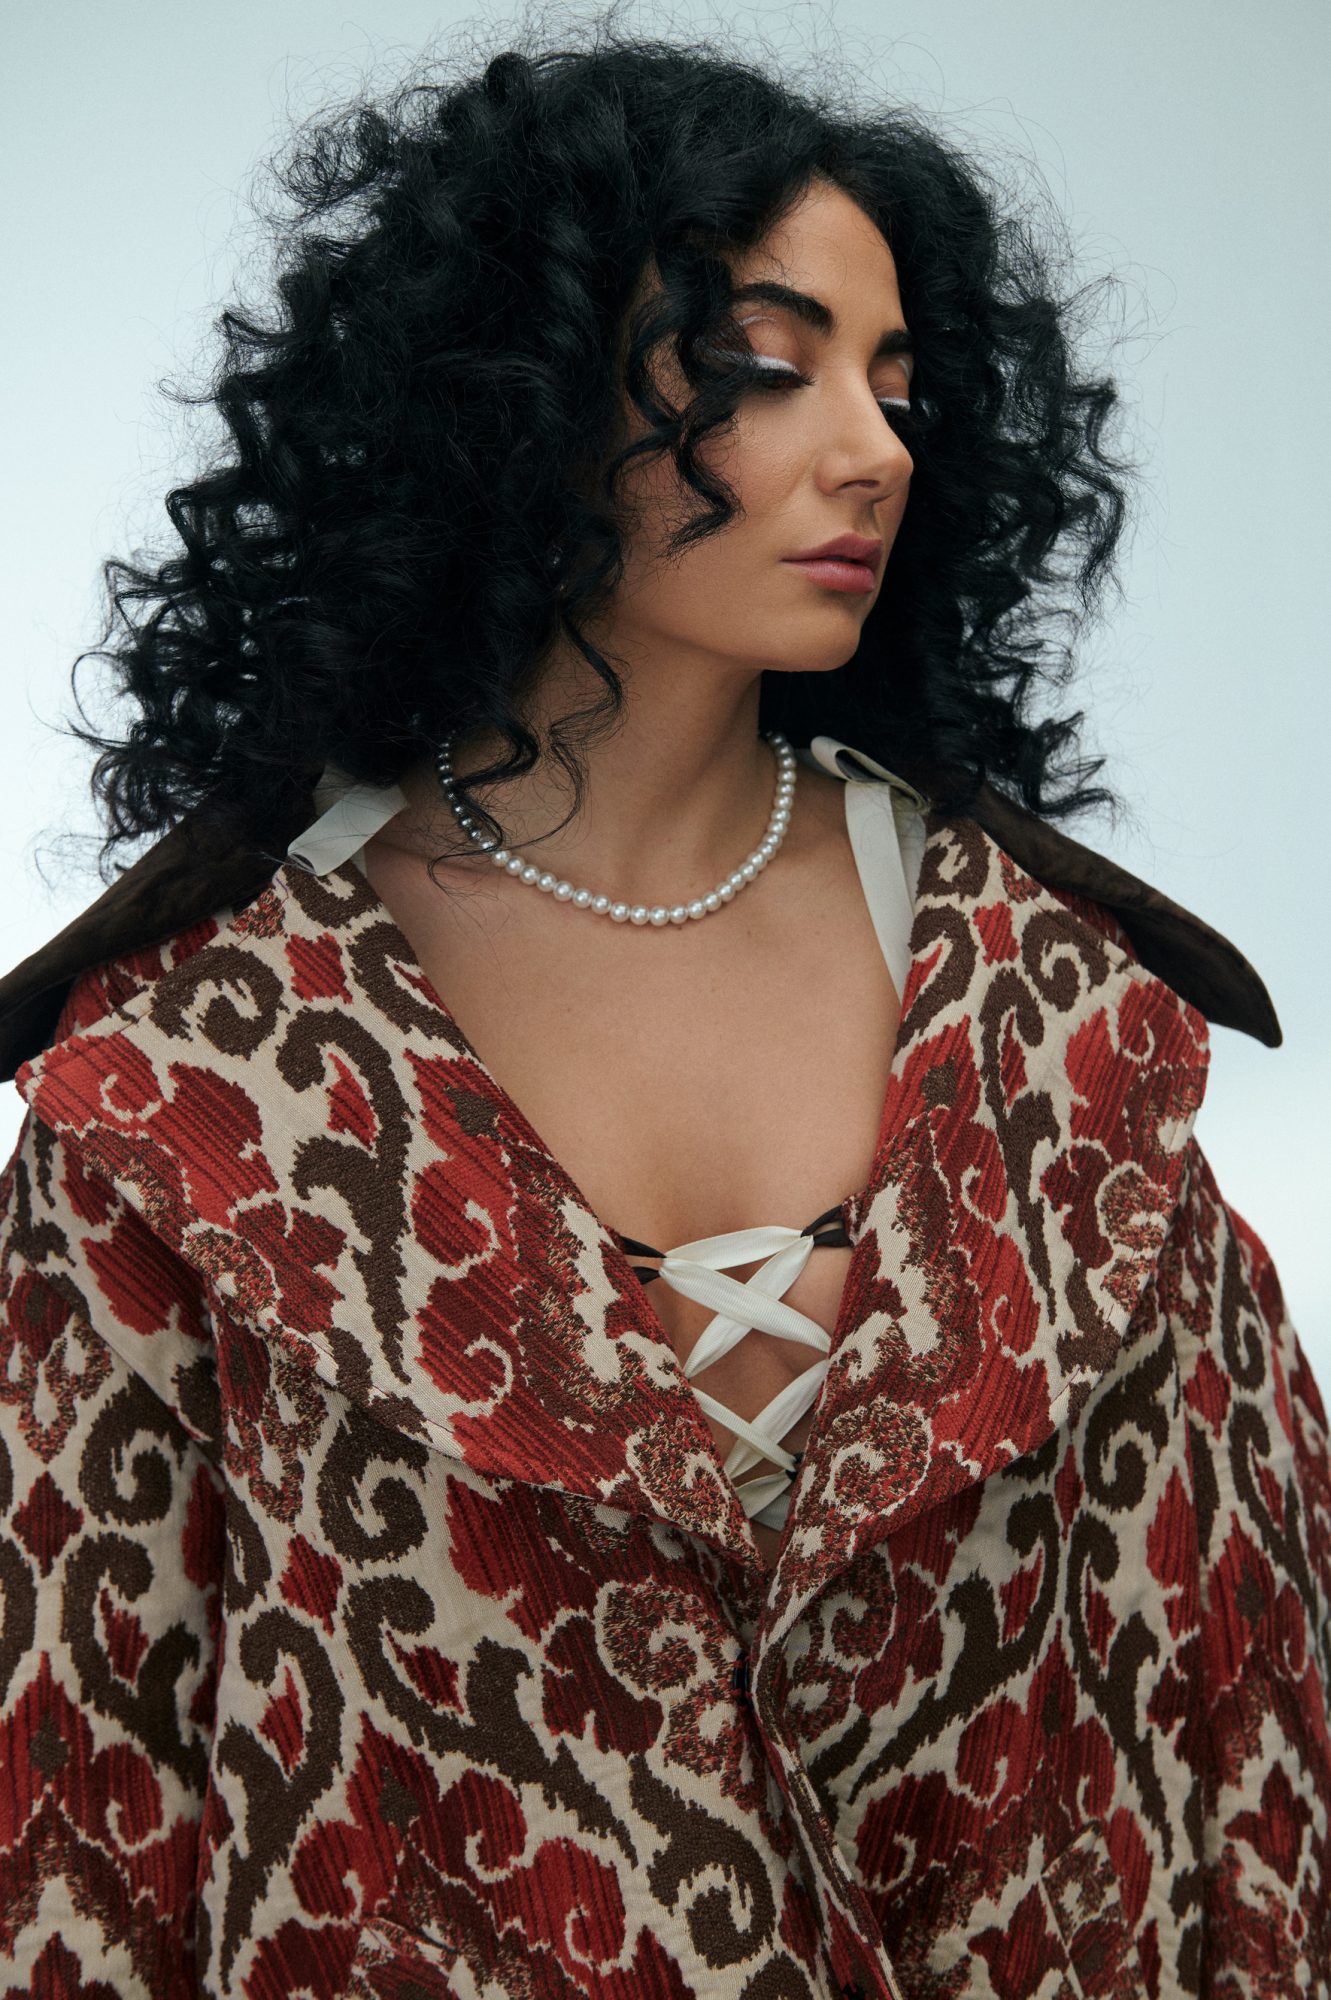 Dorian Who is looking down. Her hair is full of curls and she is wearing a large overcoat.